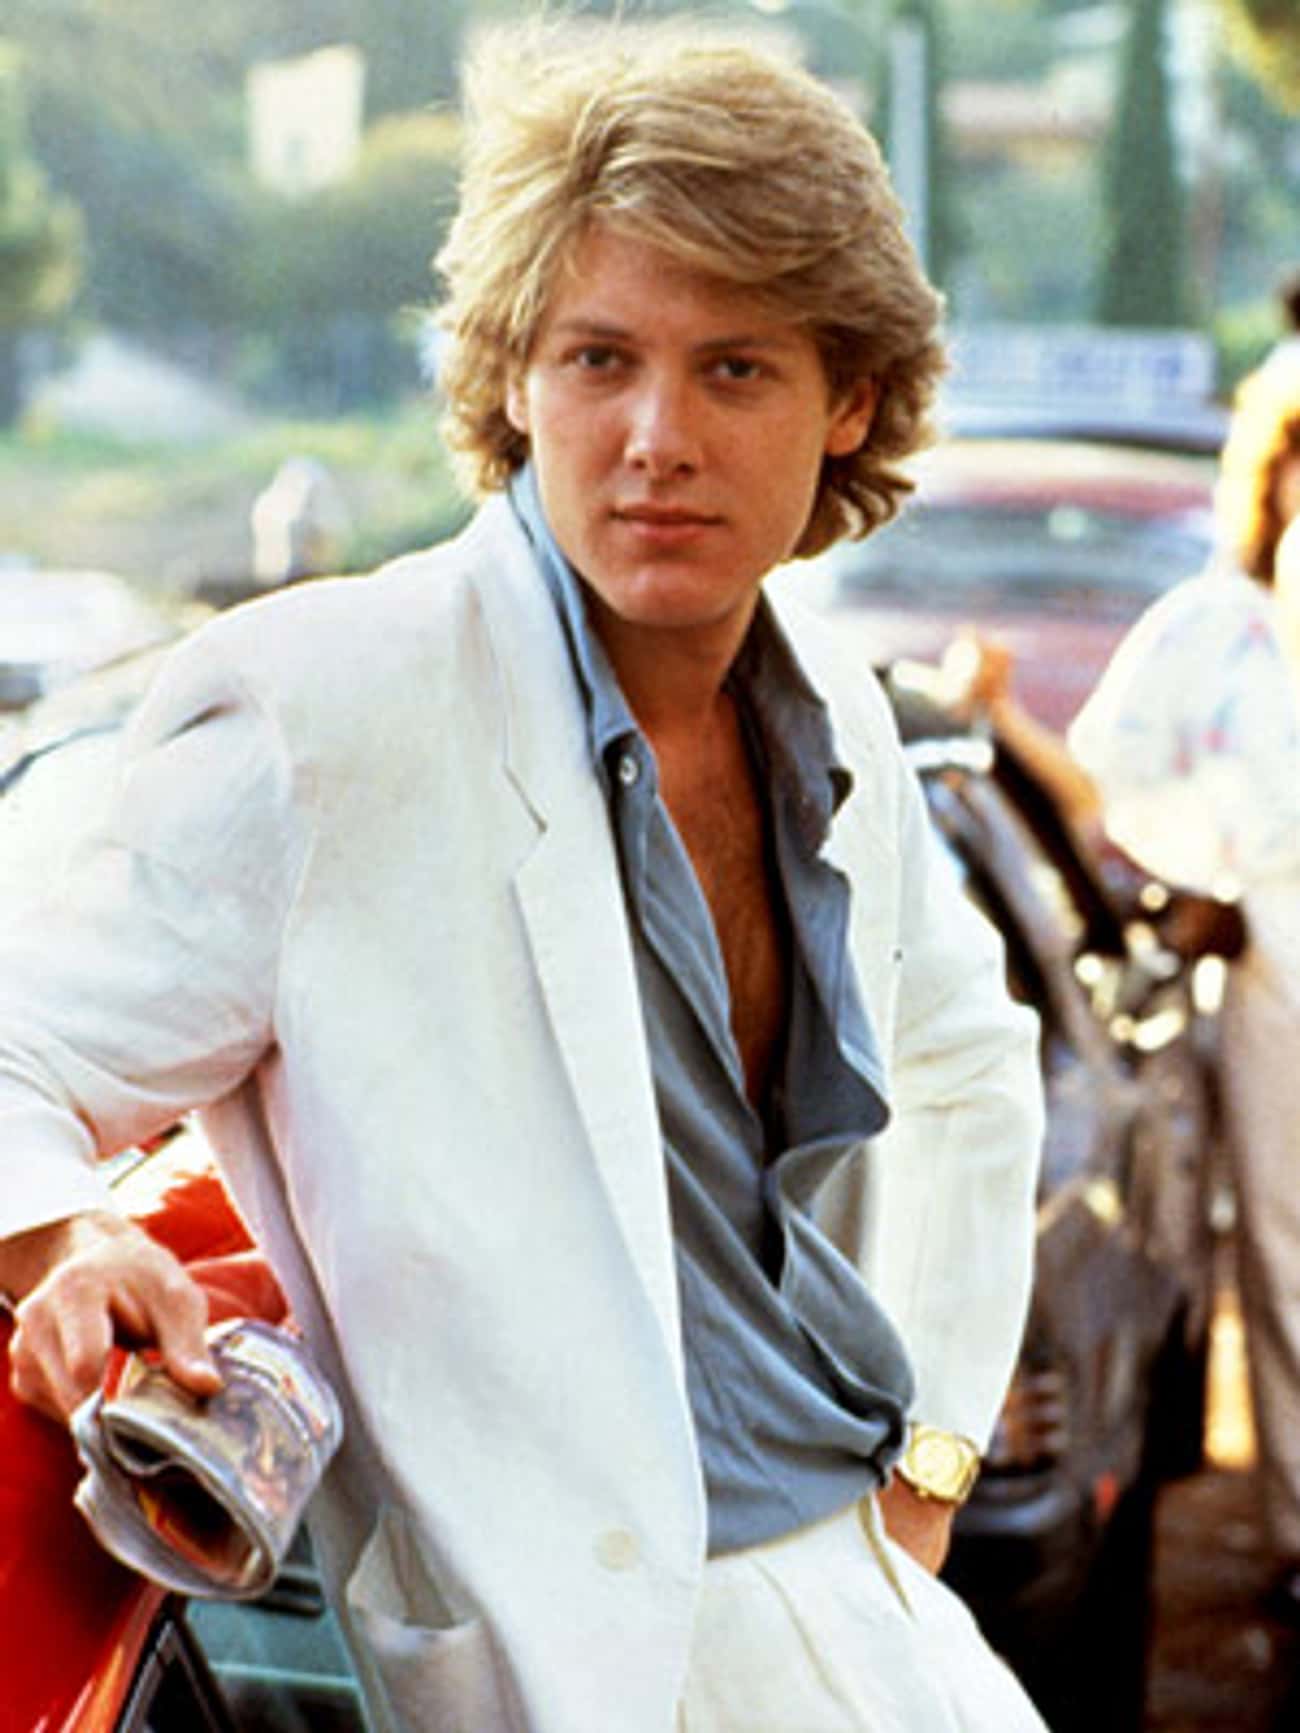 Young James Spader in White Suit with Gray Buttondown